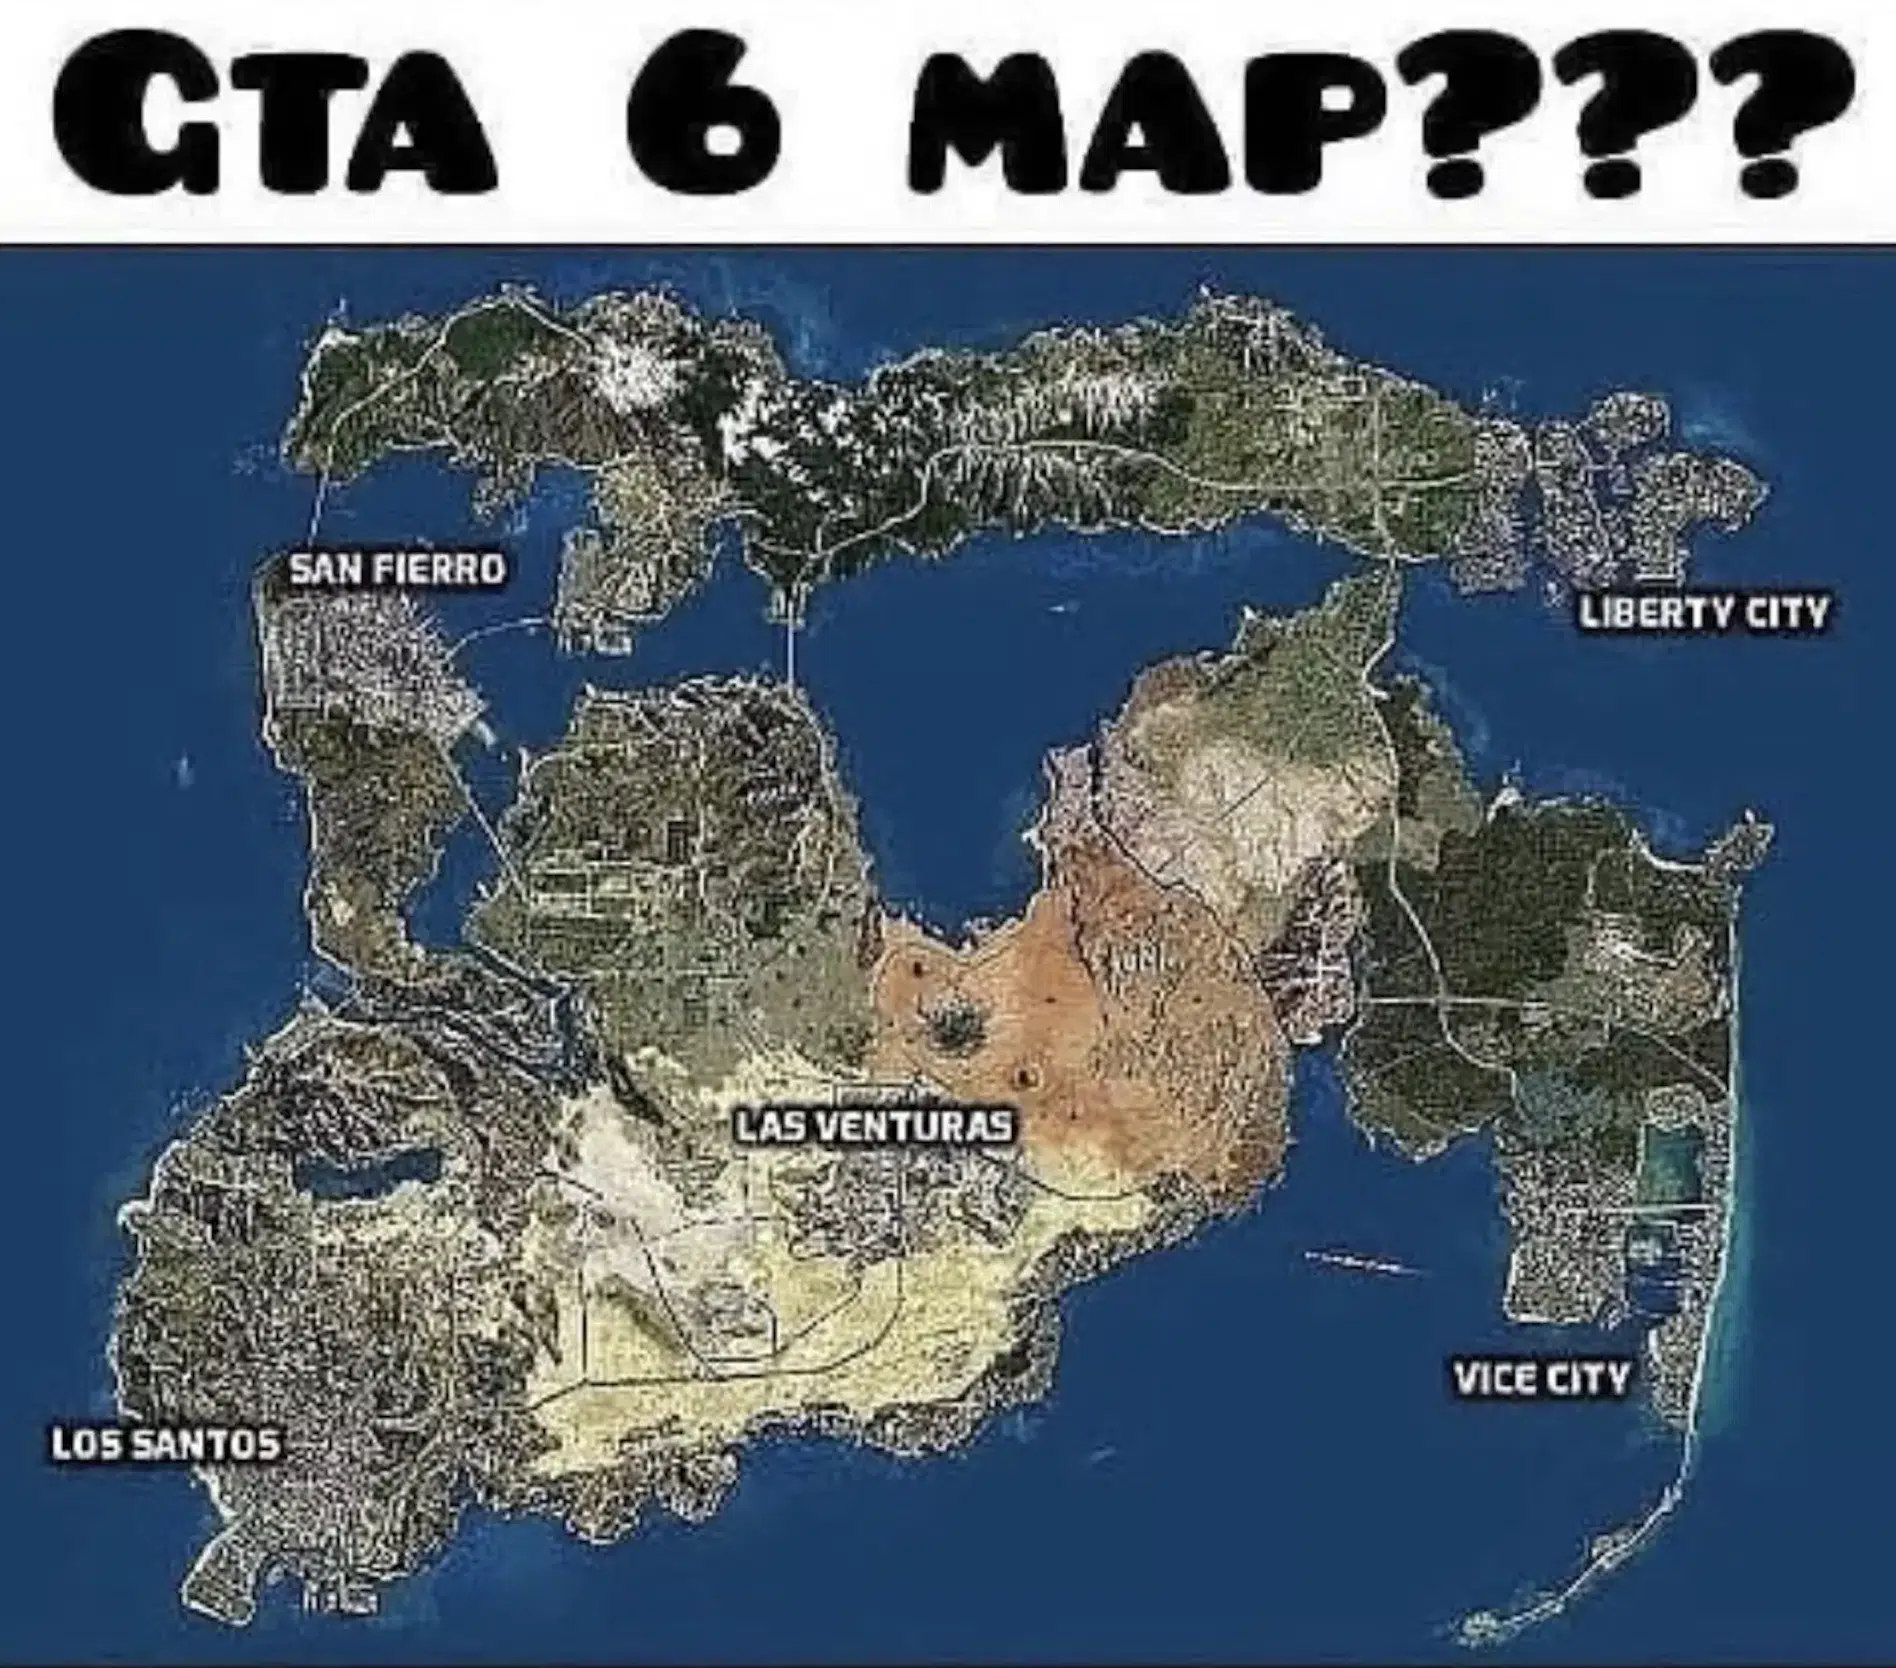 New GTA VI map leak gives fans the one thing they all want, gta 6 map 